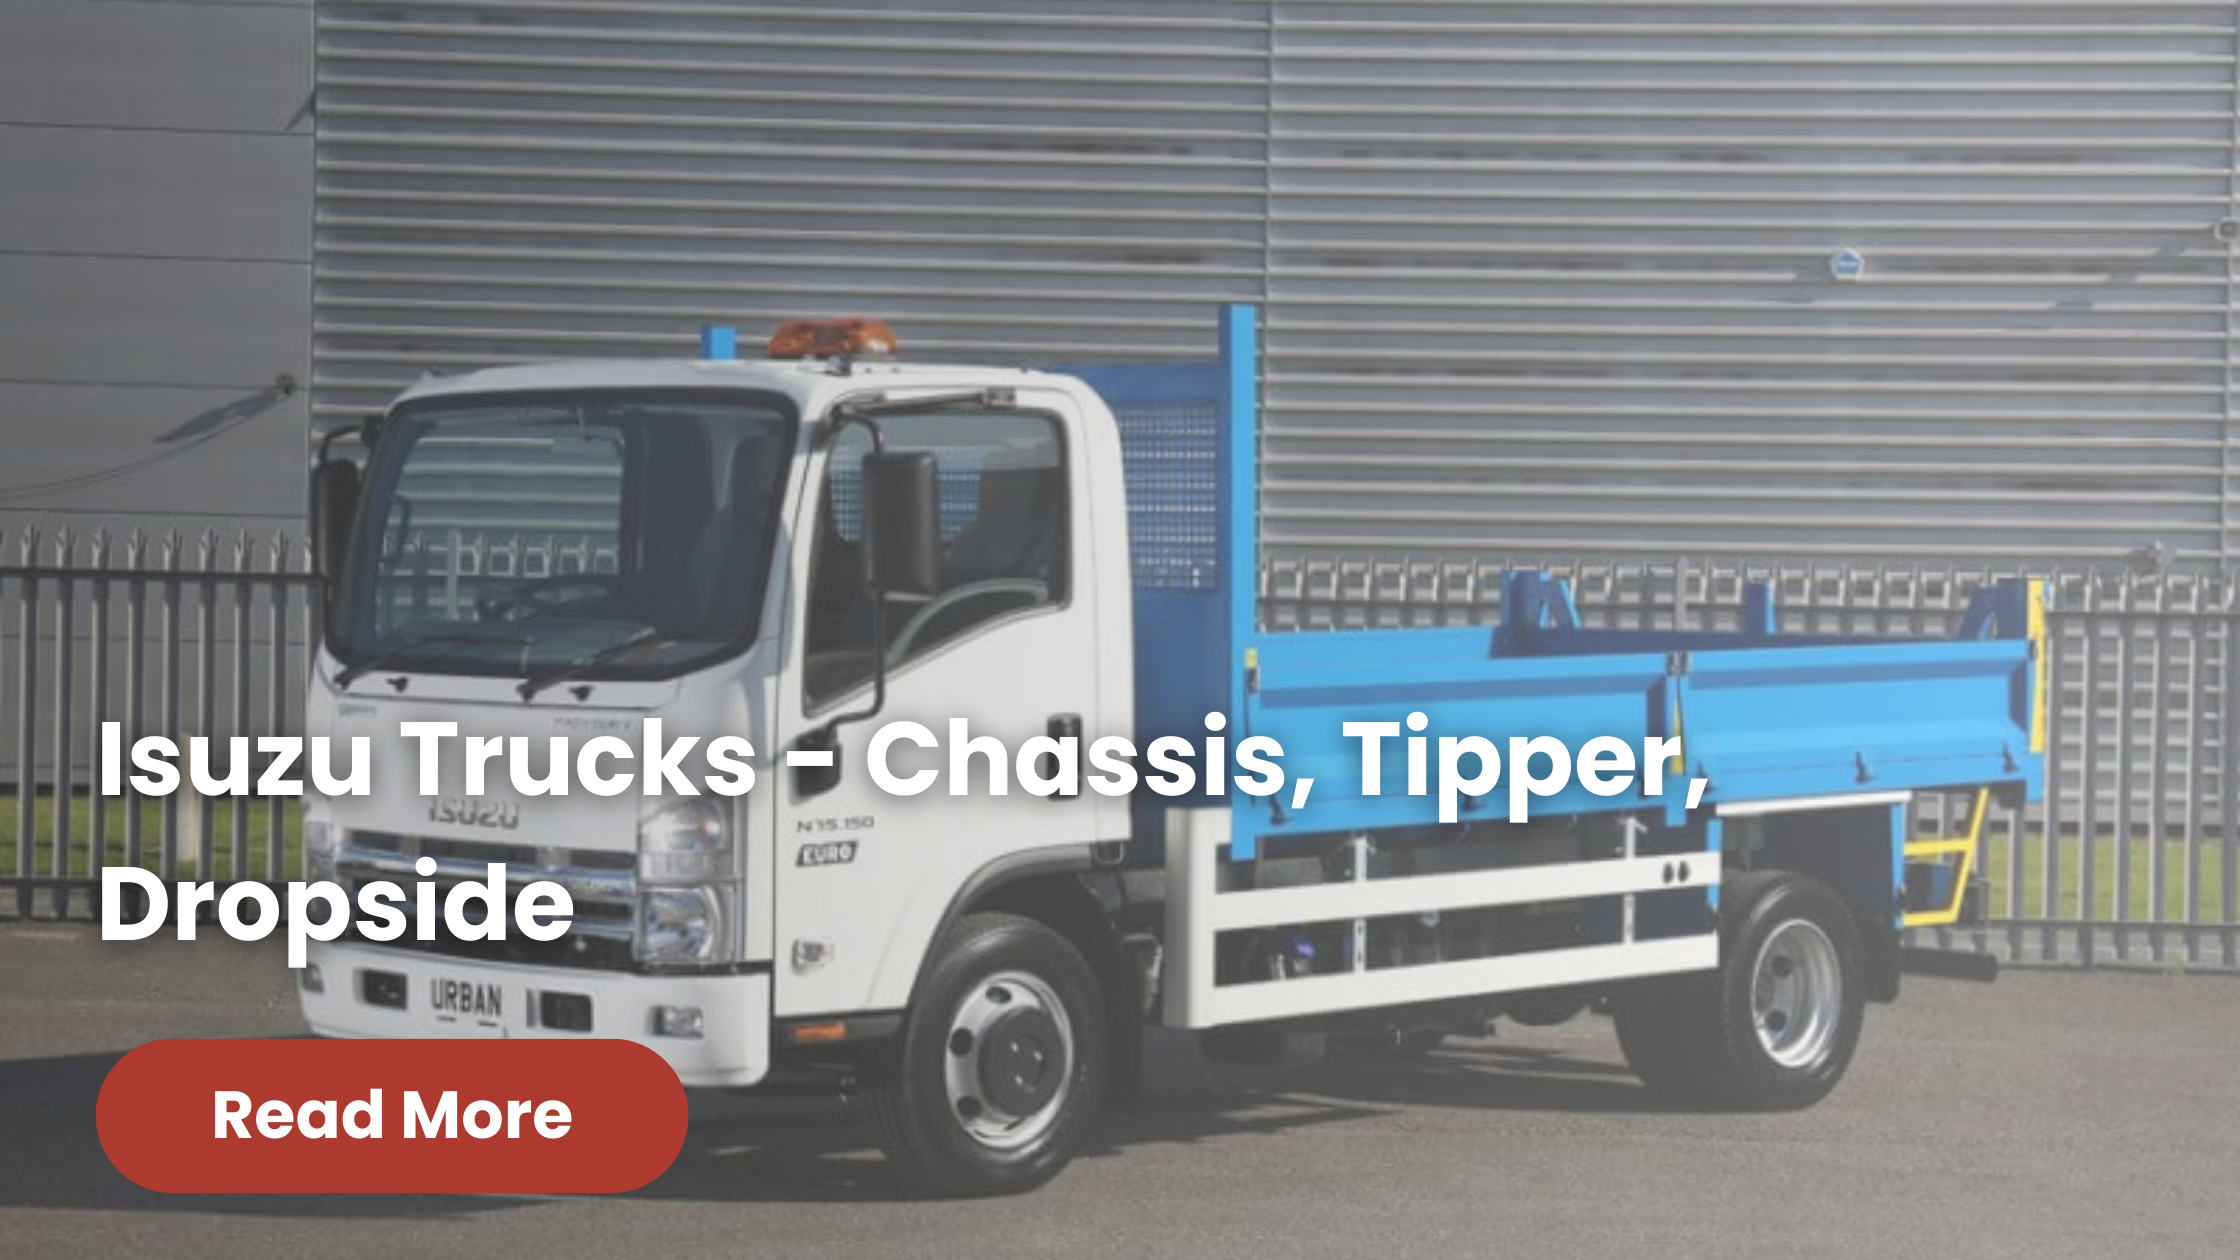 Isuzu Dropside, Chassis Cab, and Tipper Comparison